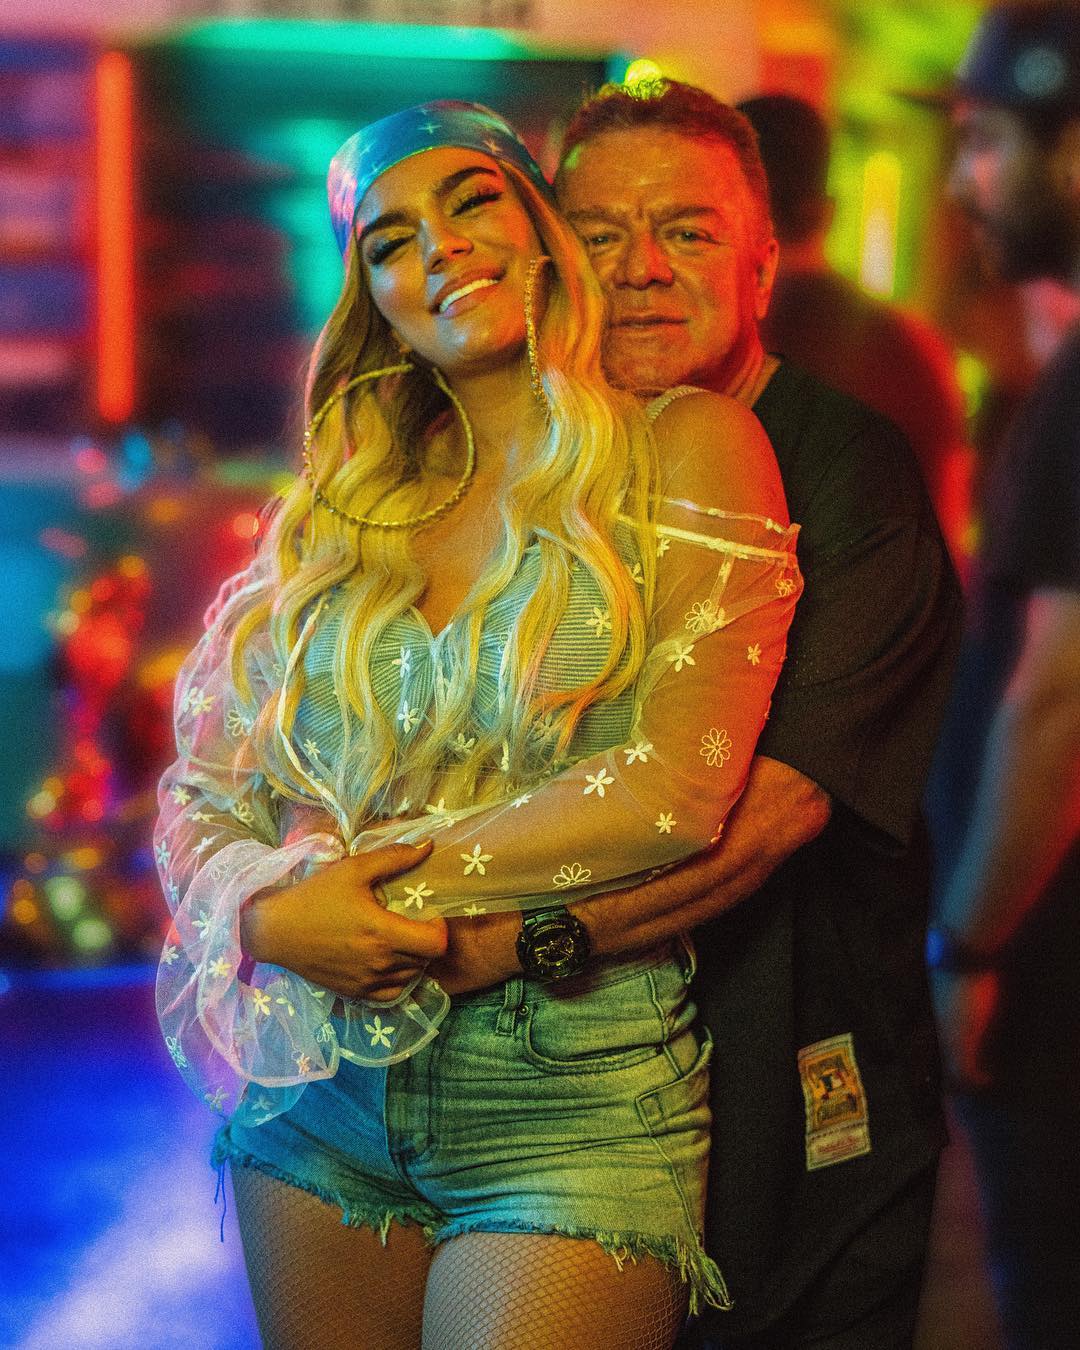 Karol G’s parents, especially her dad, pushed her towards music.